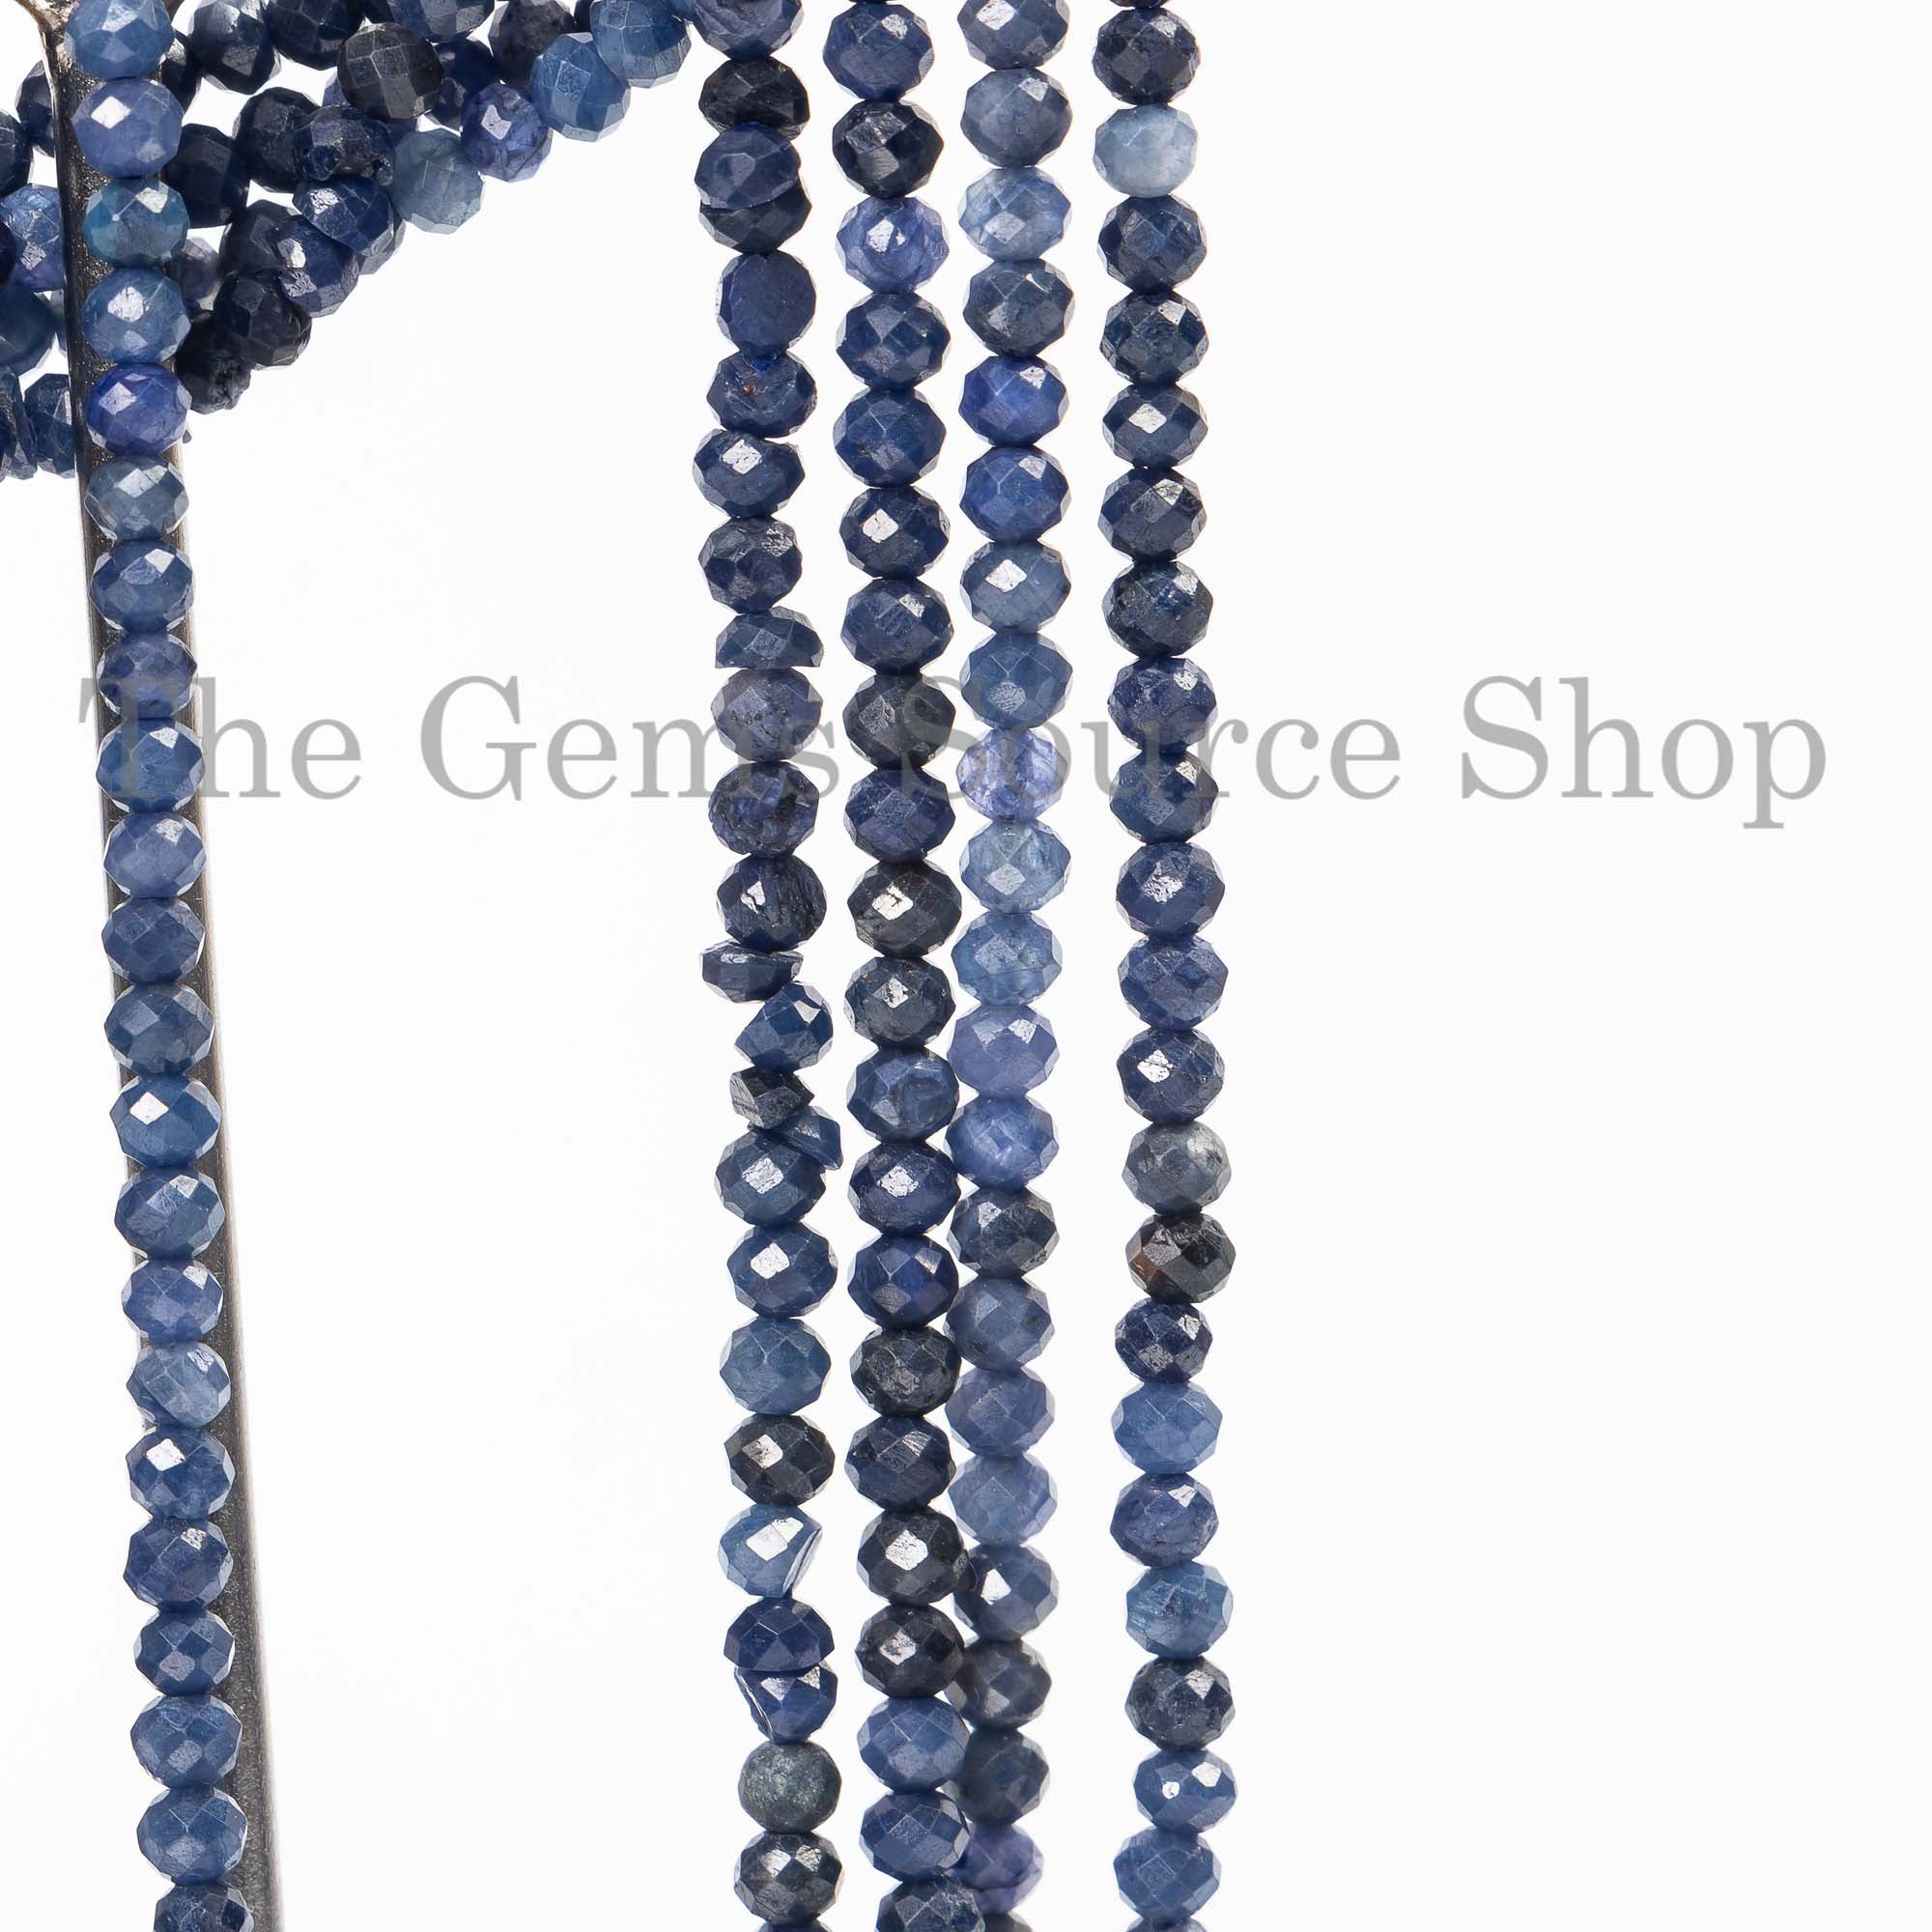 2.5-3.5mm Blue Sapphire Rondelle Faceted Gemstone Beads For Jewelry, TGS-4269